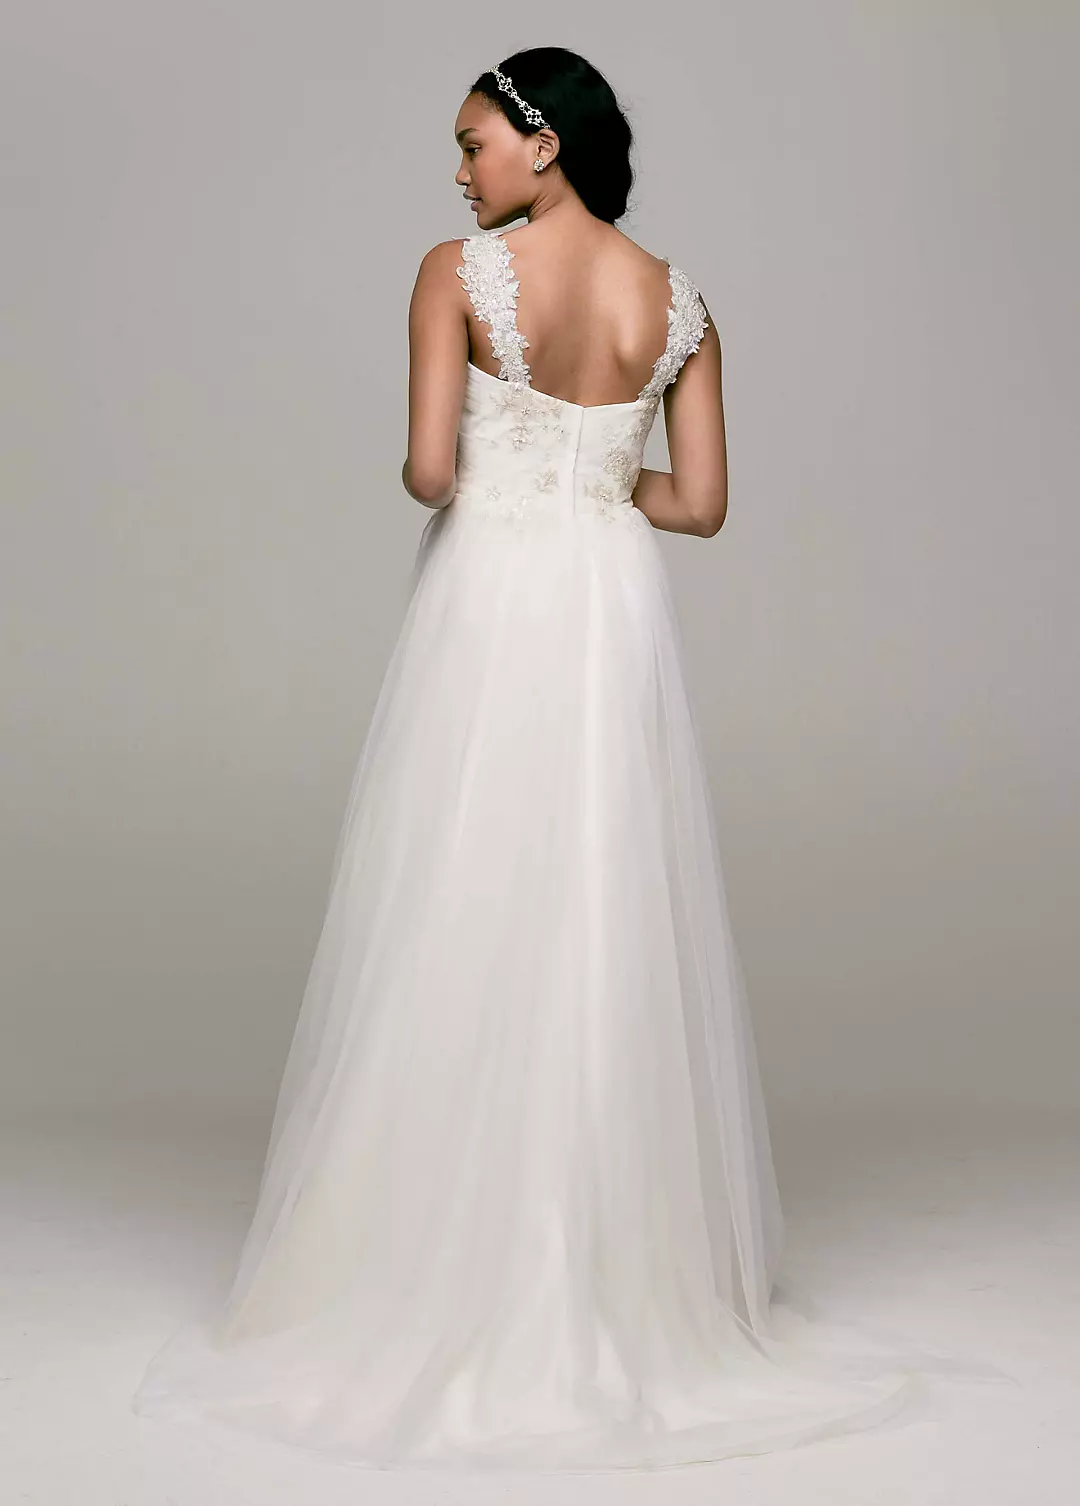 Tank Tulle A-Line Wedding Dress with Lace Details Image 2